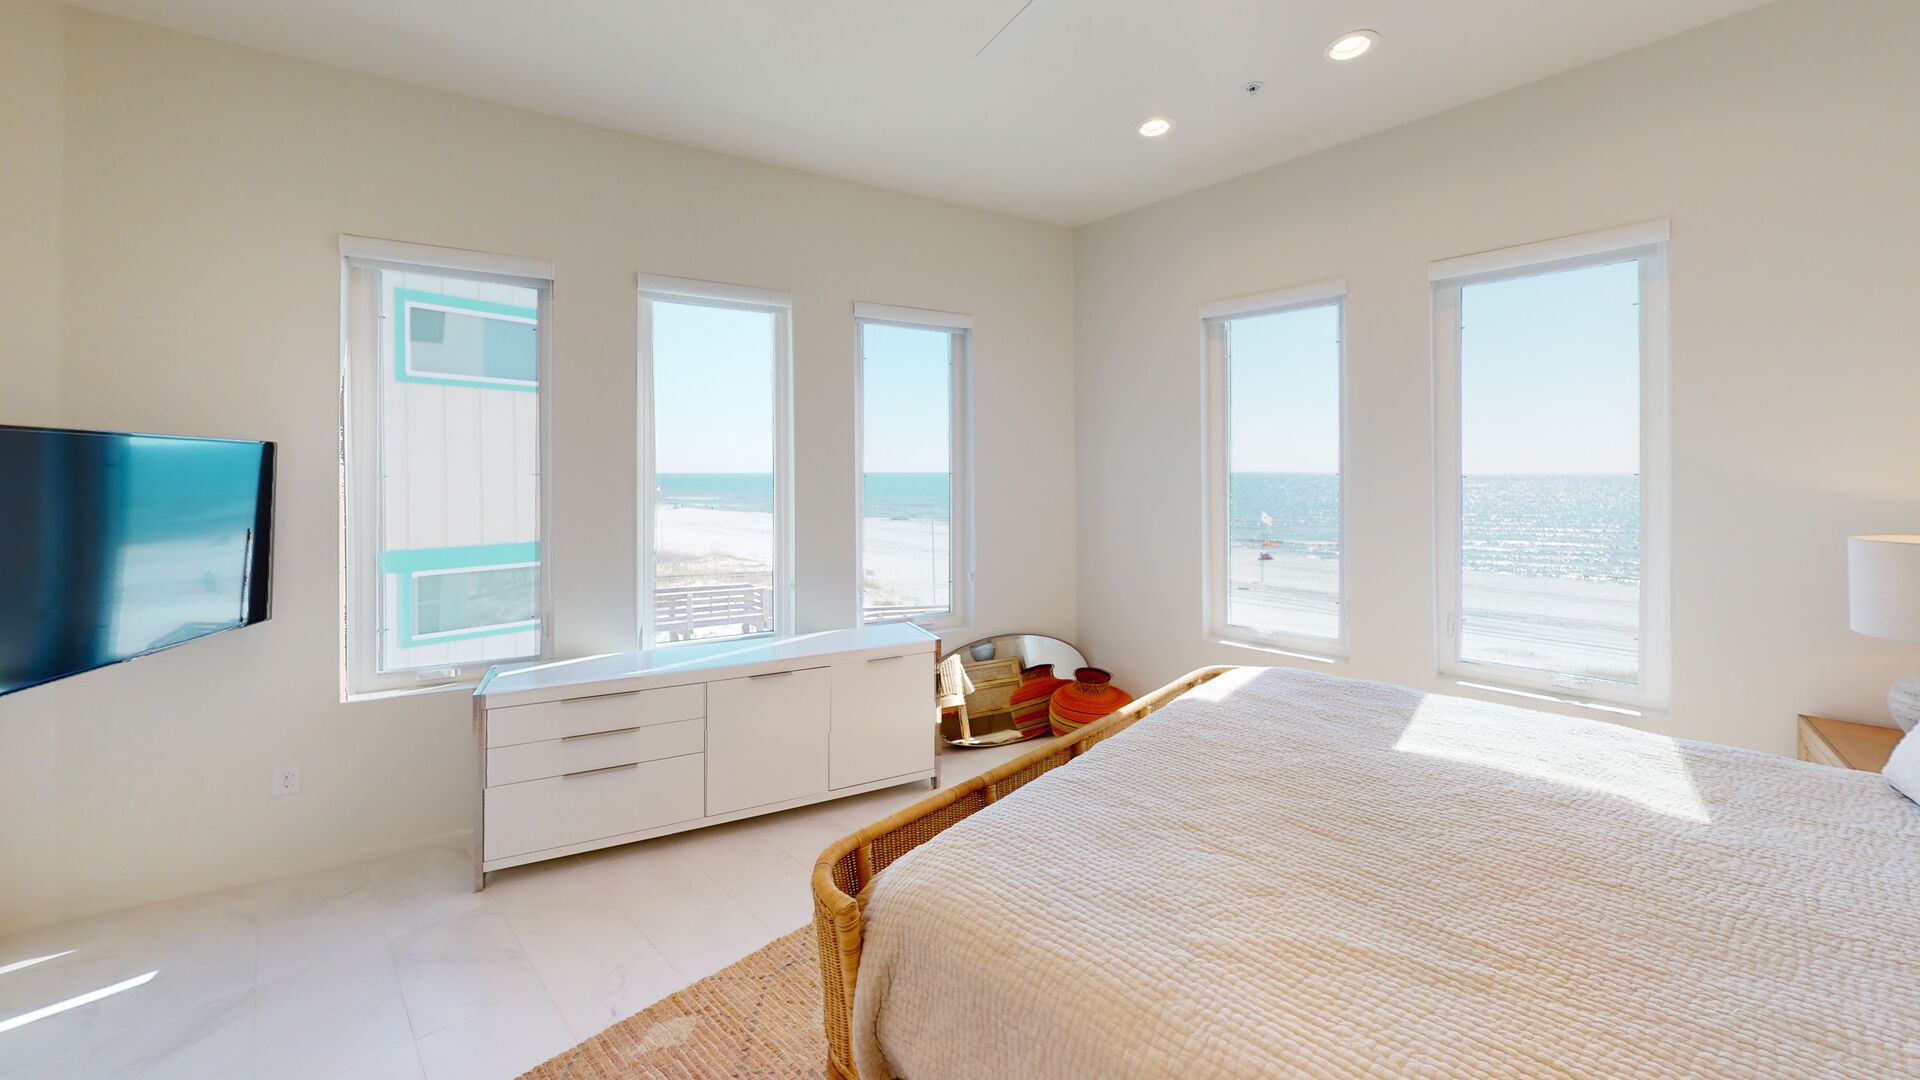 Bedroom 3 boasts gorgeous Gulf views, a TV and a private bathroom